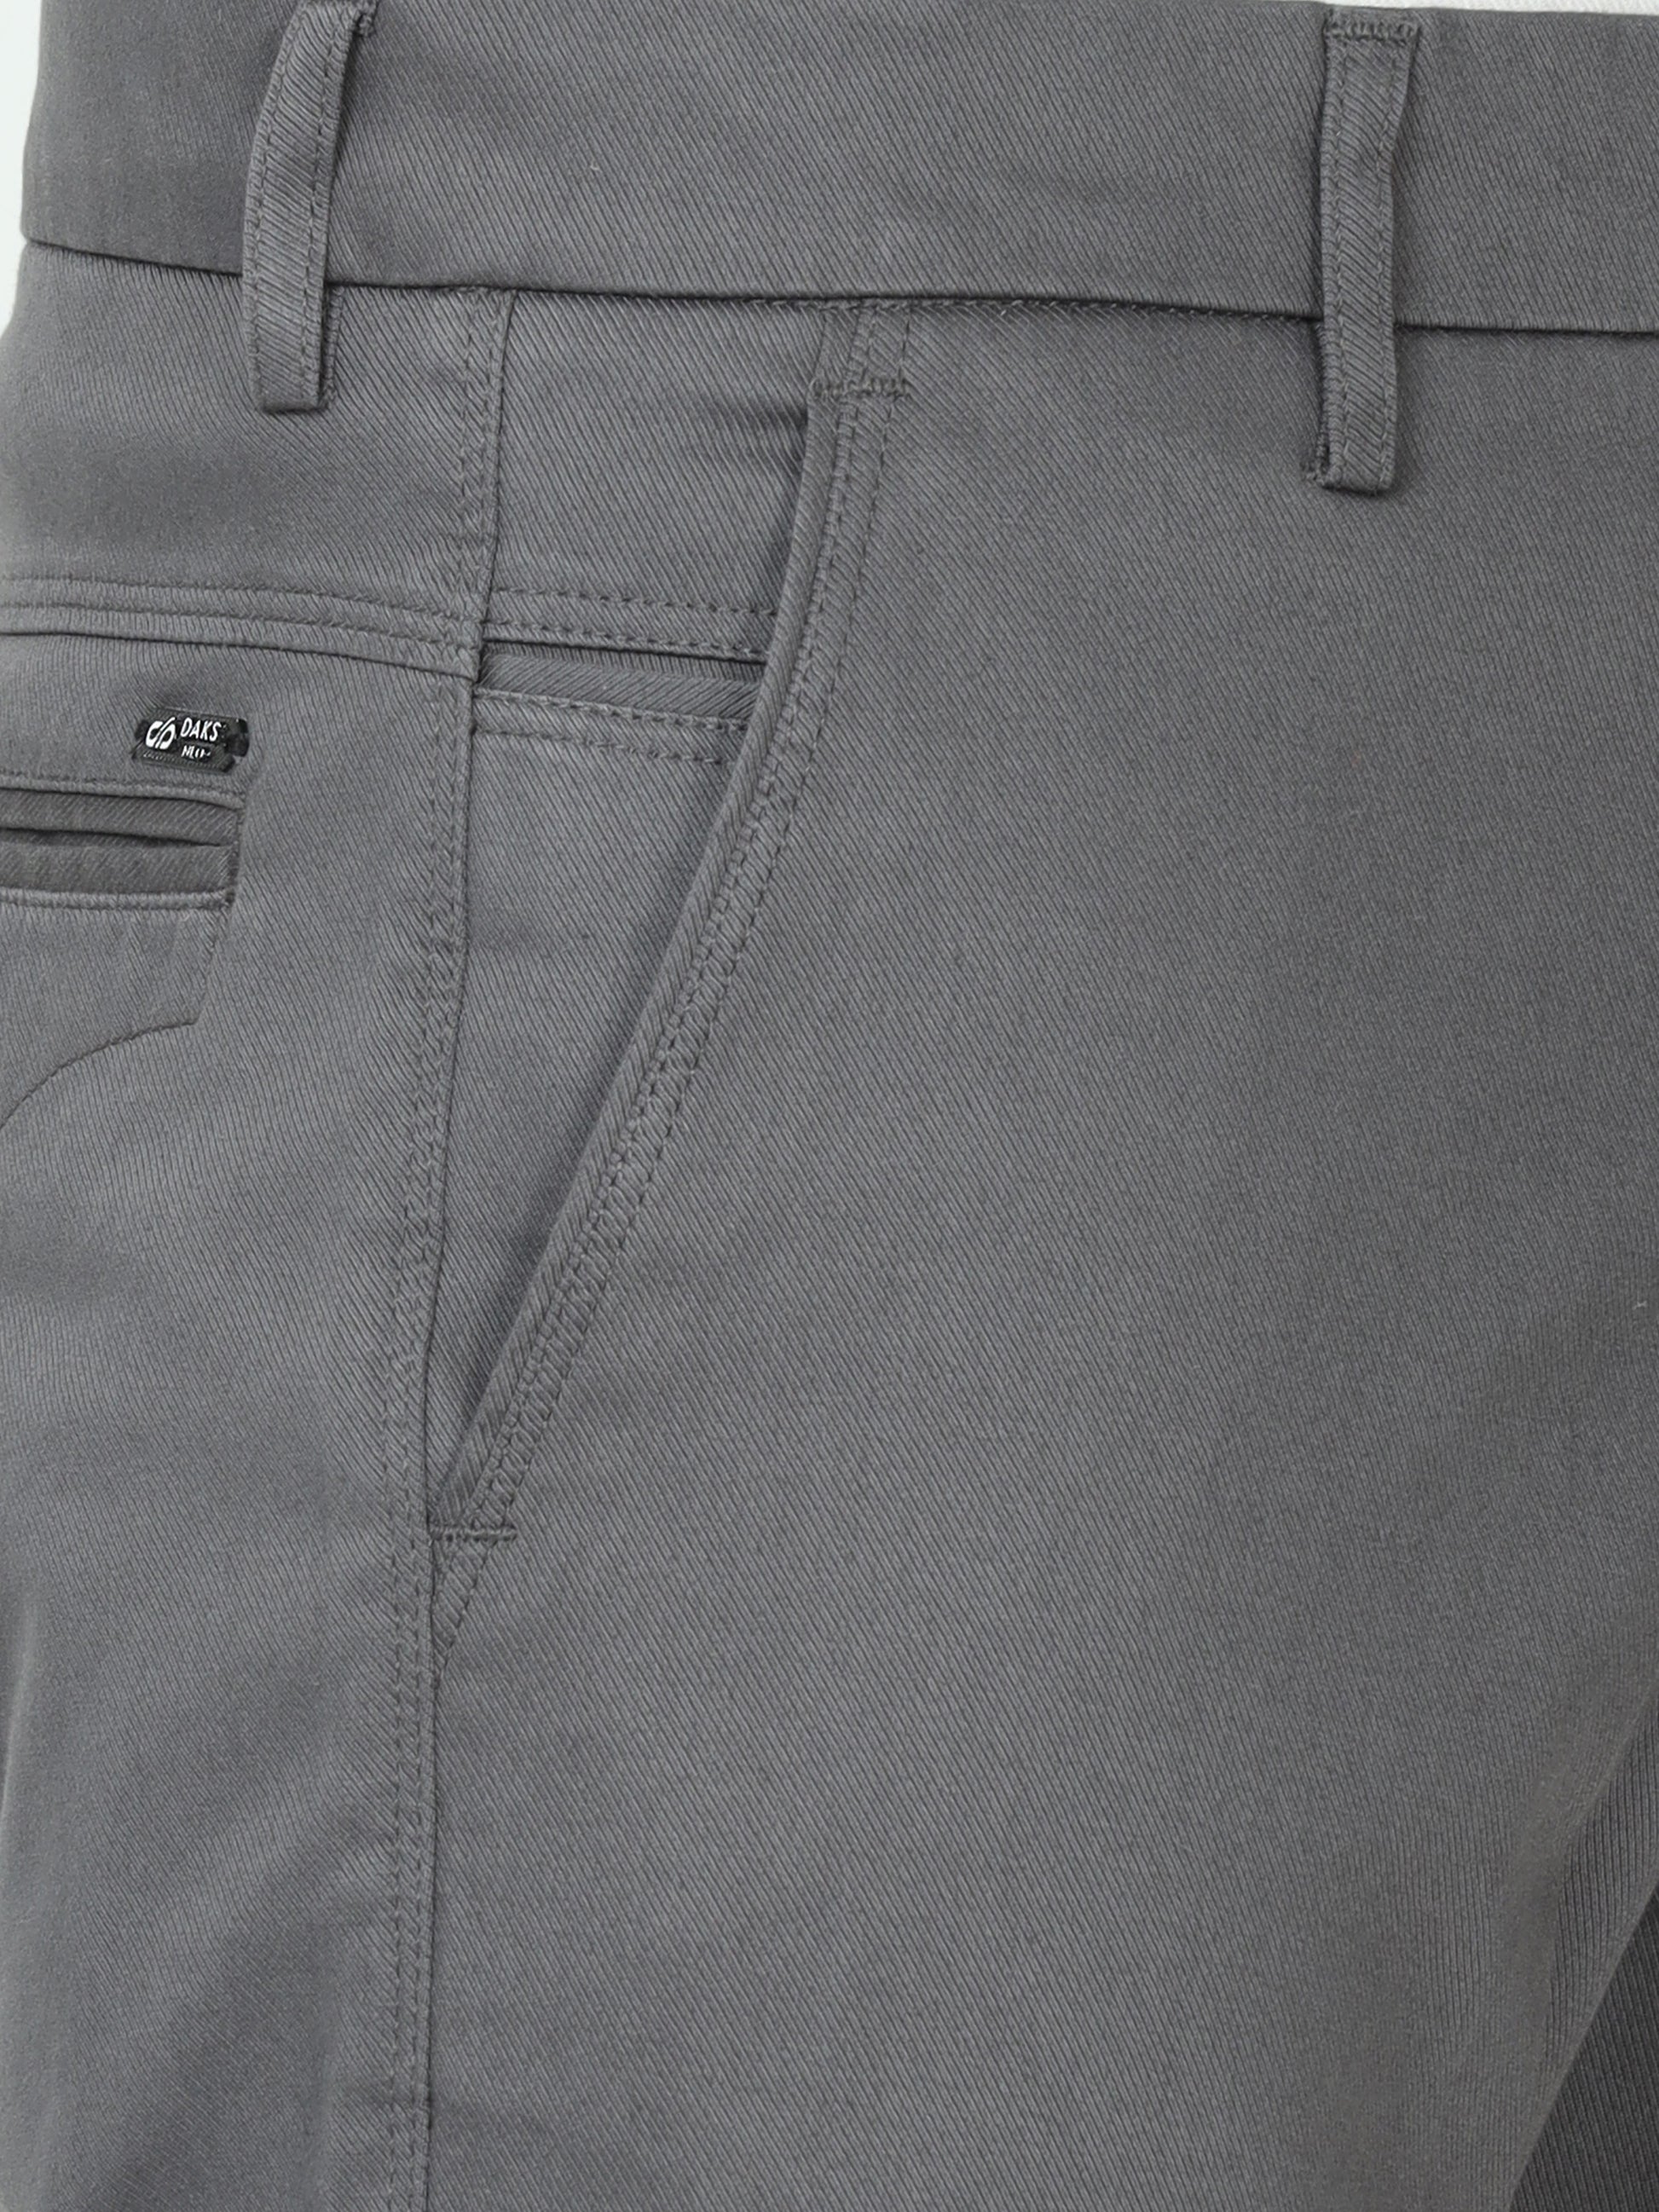 Grey Solid Trouser